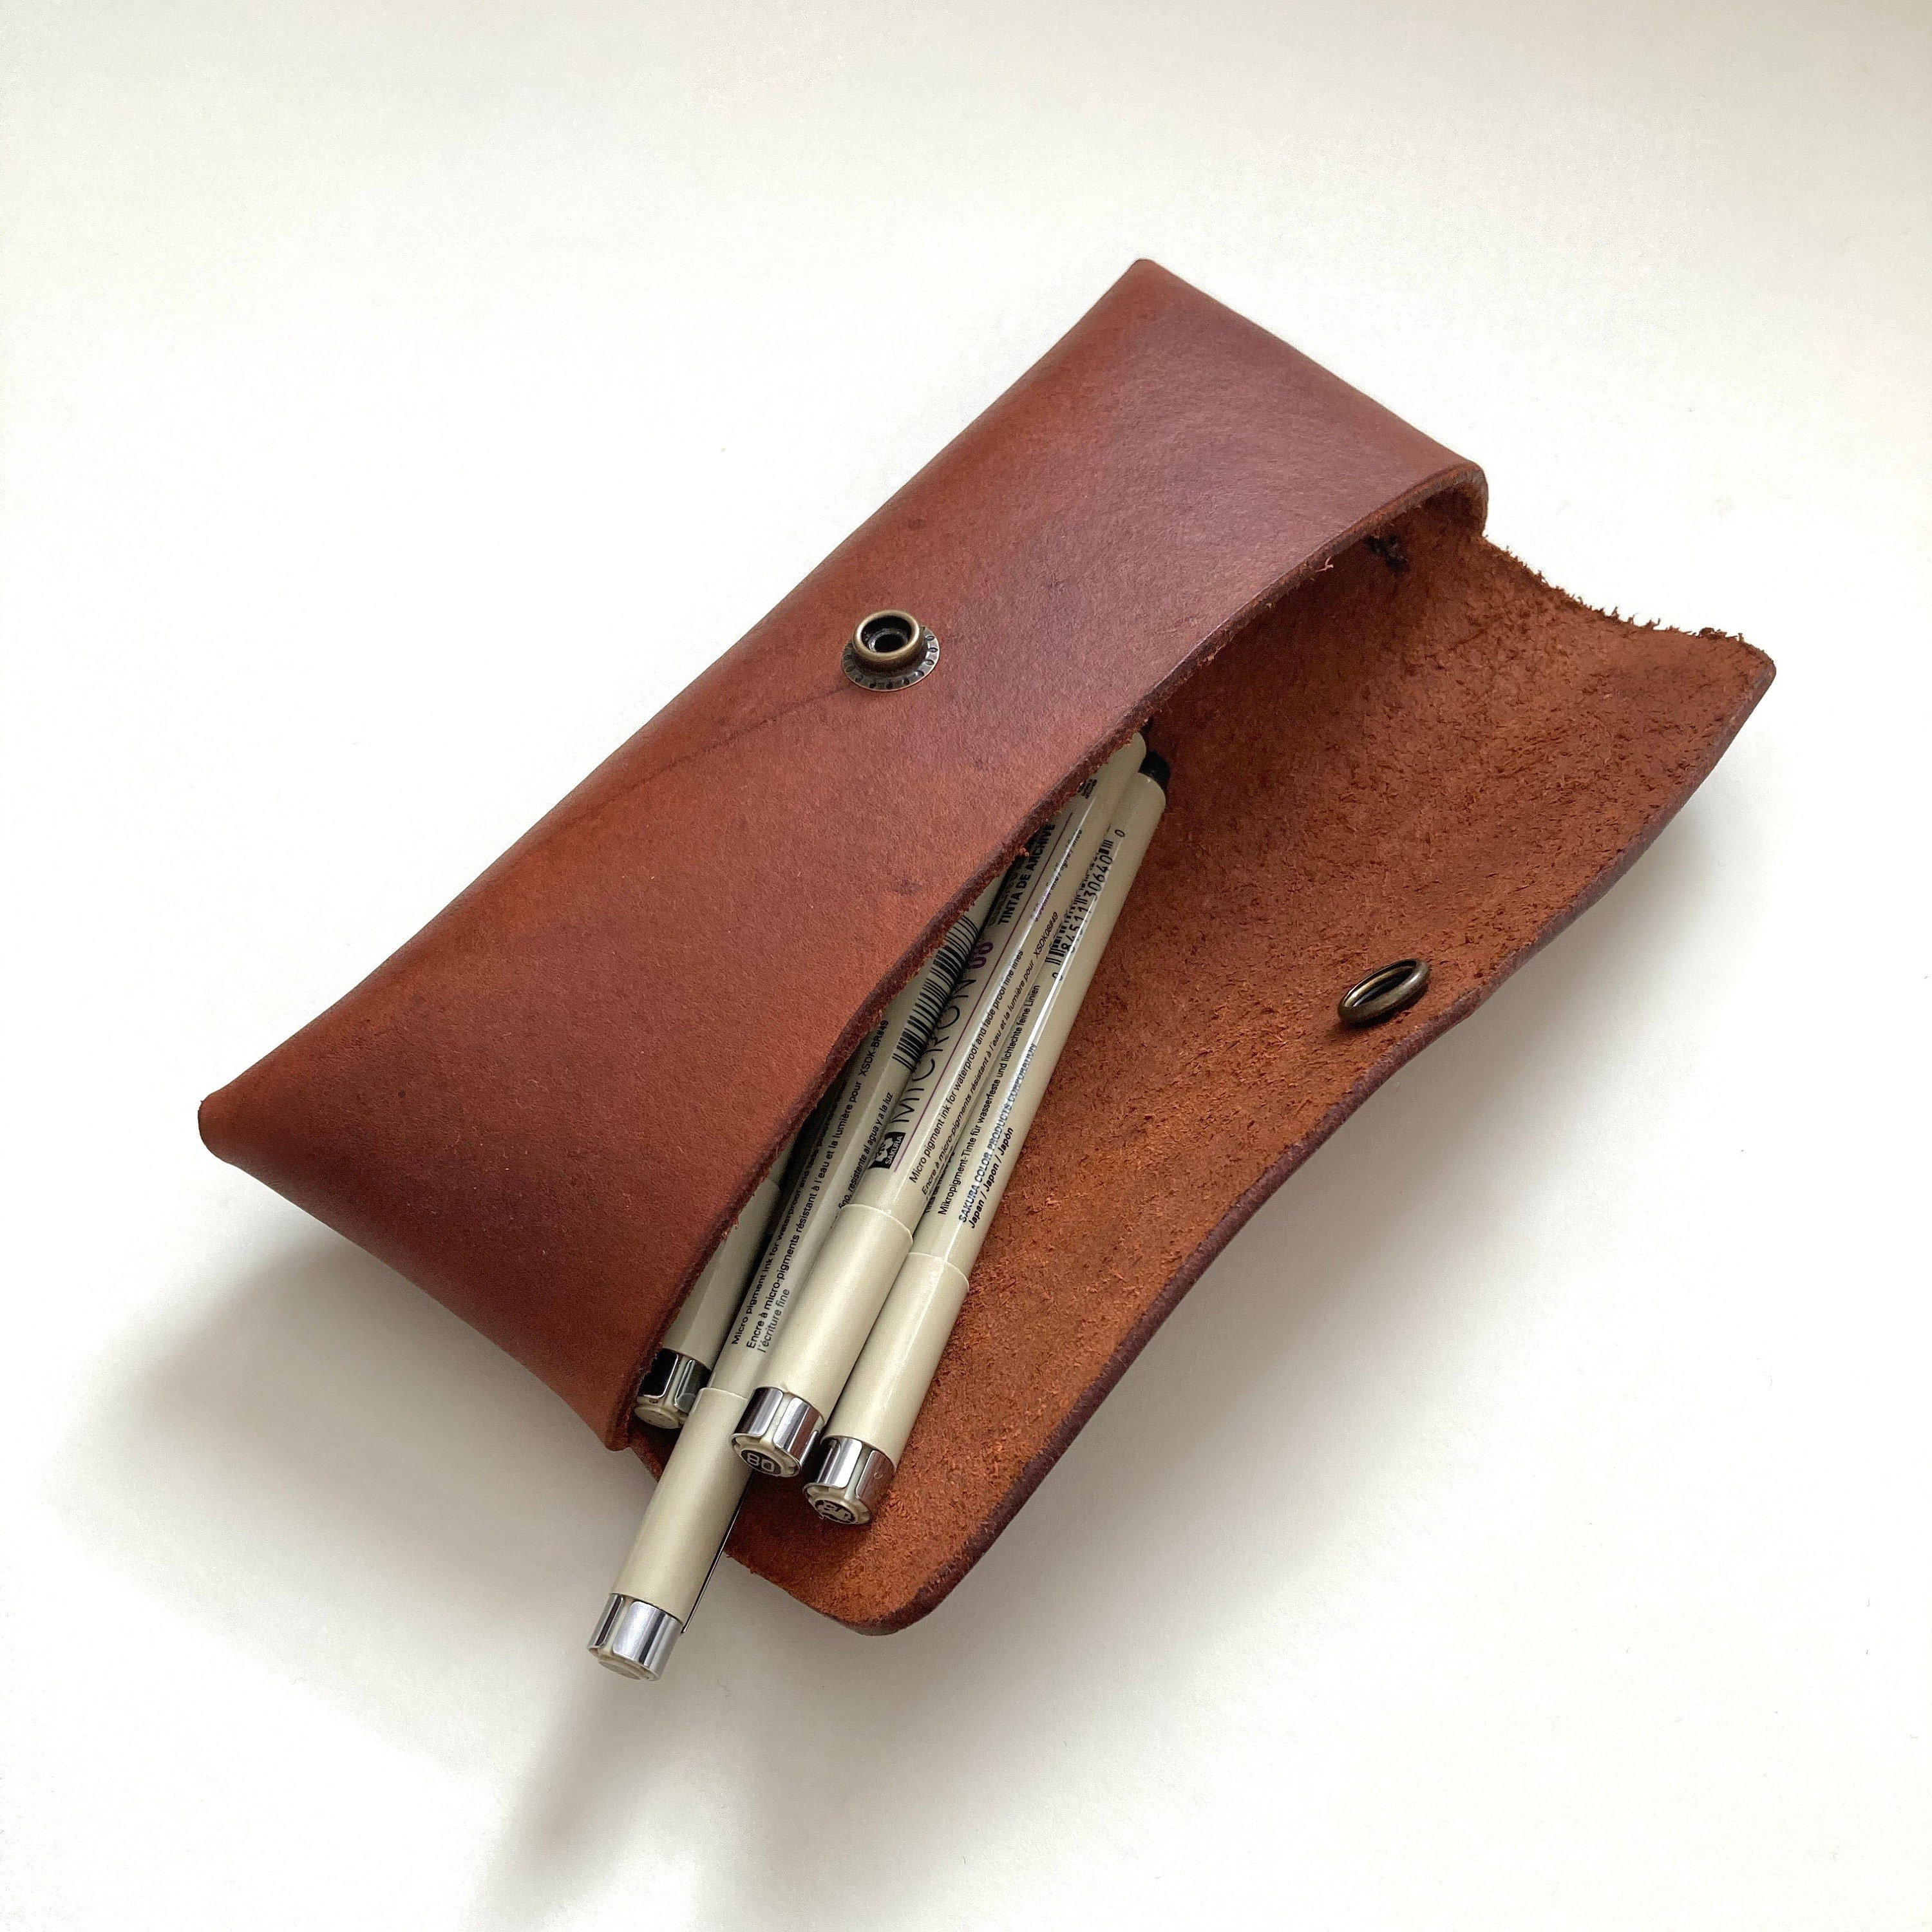  Rustic Genuine Leather Pencil Roll - Pen and Pencil Case - Dark  Brown : Arts, Crafts & Sewing